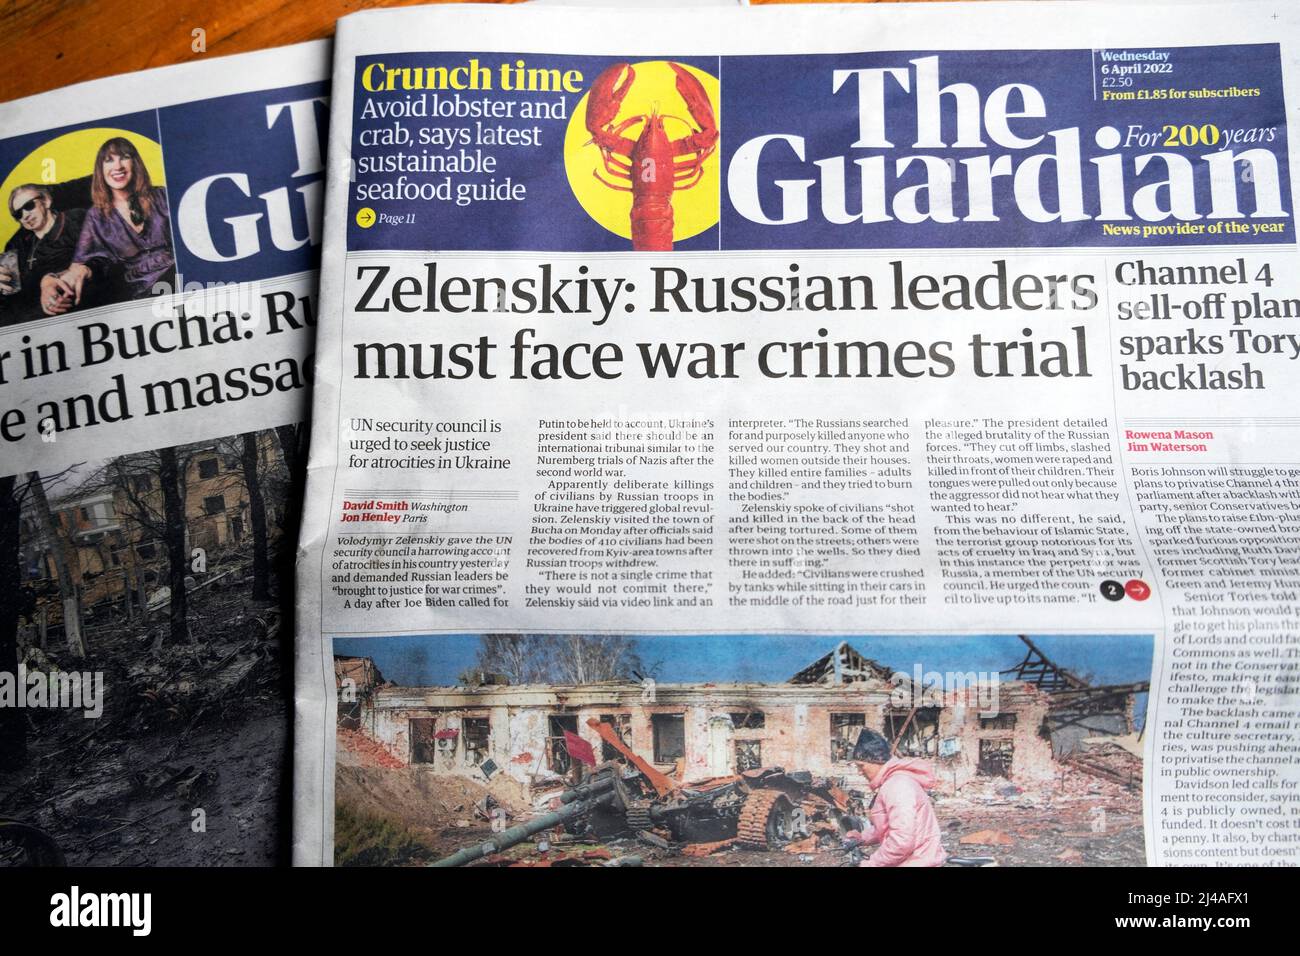 'Zelenskiy: Russian leaders must face war crimes trial' Guardian newspaper headline front page on 6 April 2022 in London England UK Stock Photo